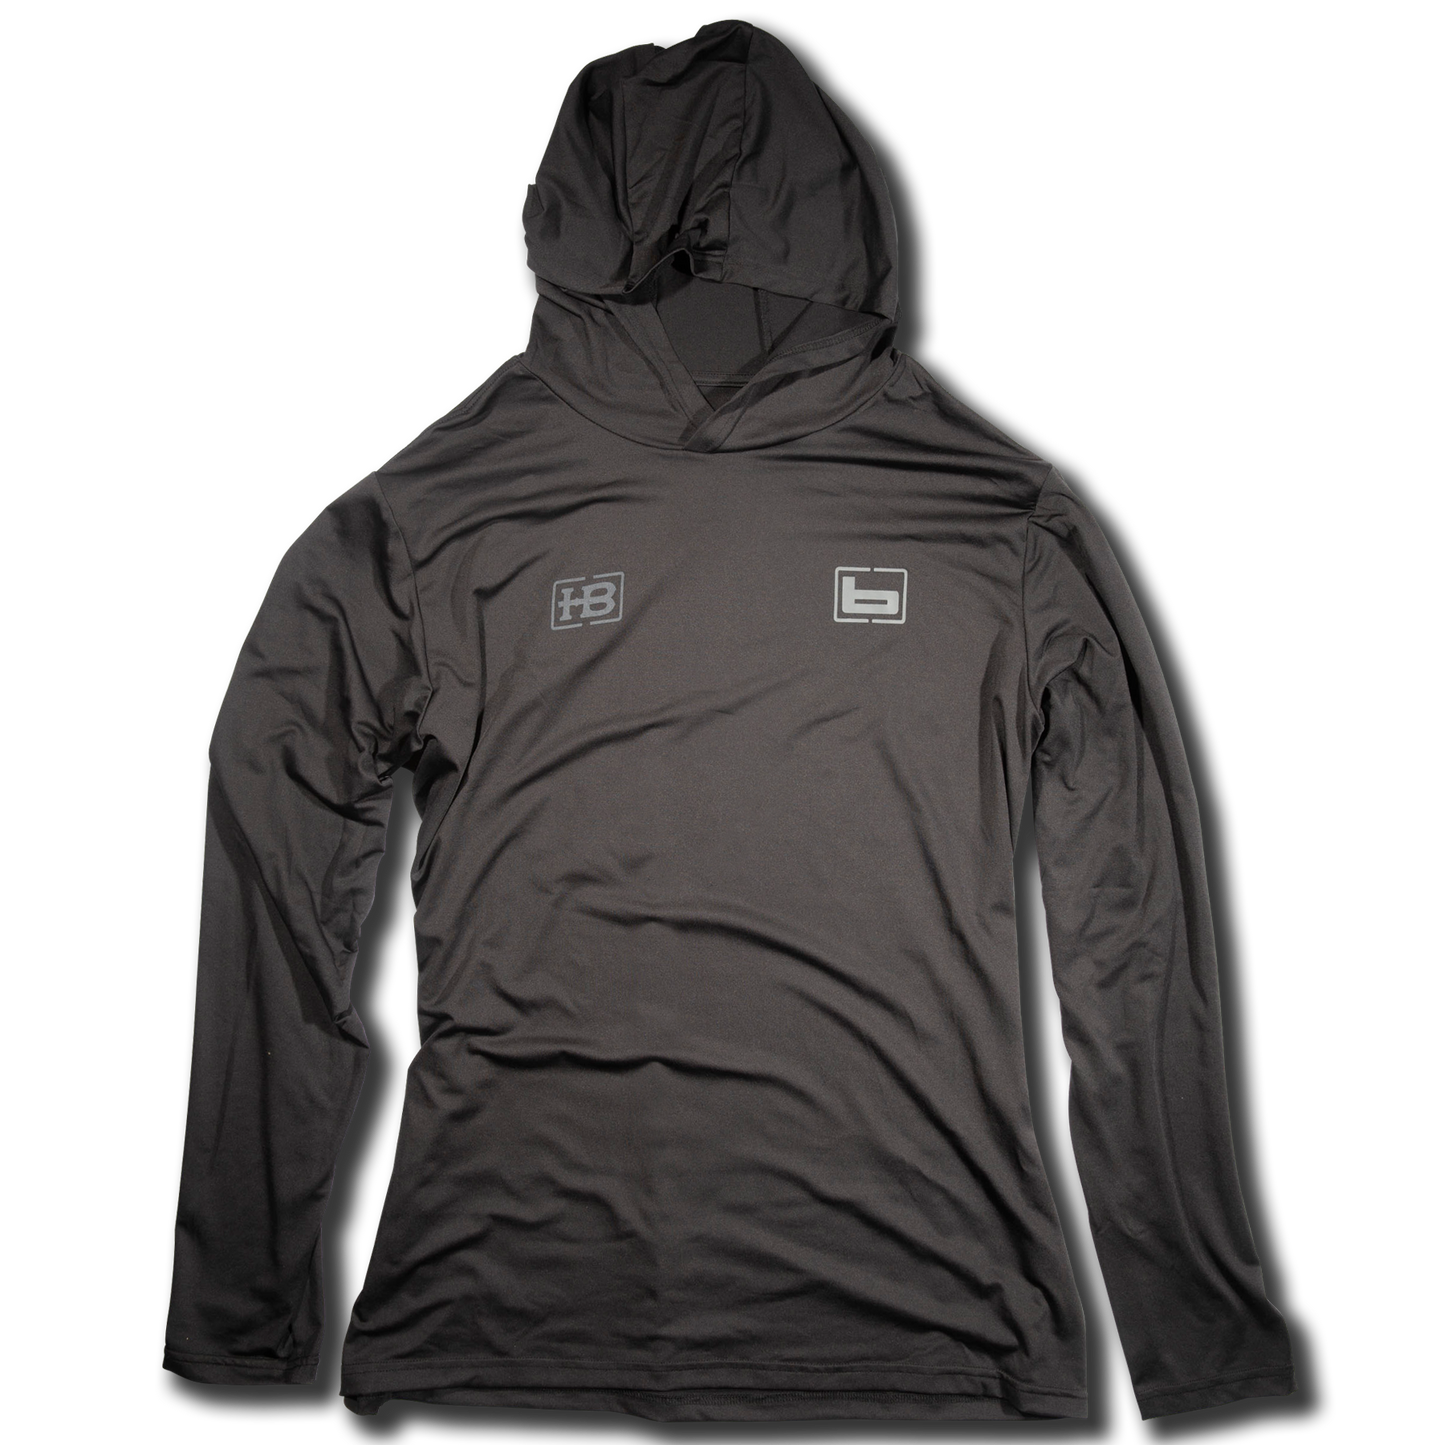 Banded FG-1 Early Season Pullover